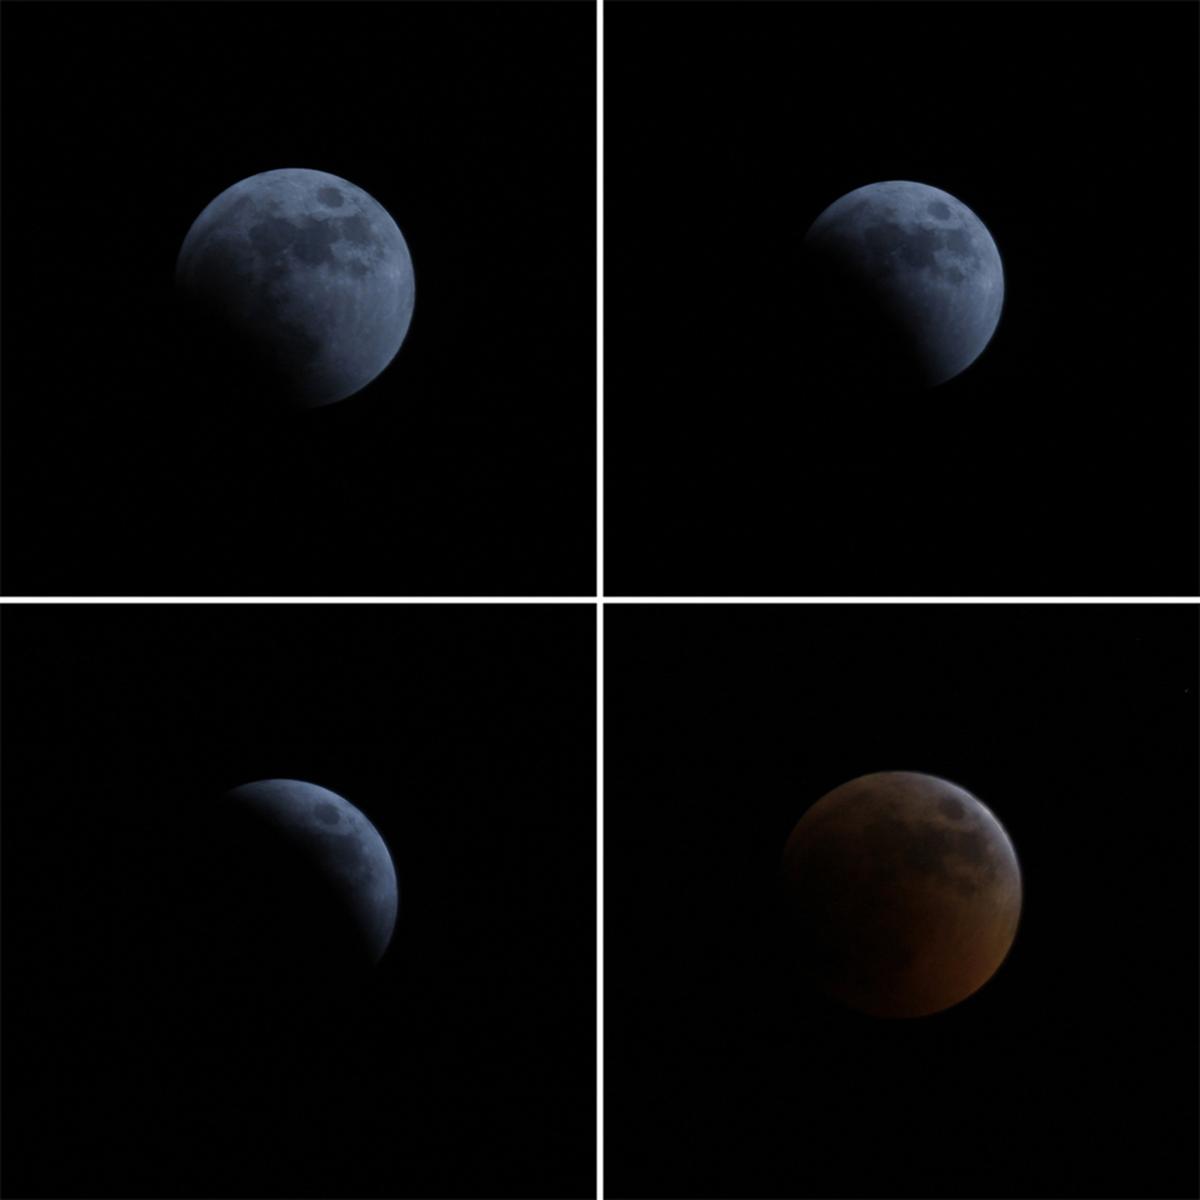 Pictures depicting different stages of the Moon during a total lunar eclipse in the night sky over Rafah on the Gaza Strip, Palestine, on June 15, 2011 (SAID KHATIB/AFP via Getty Images)